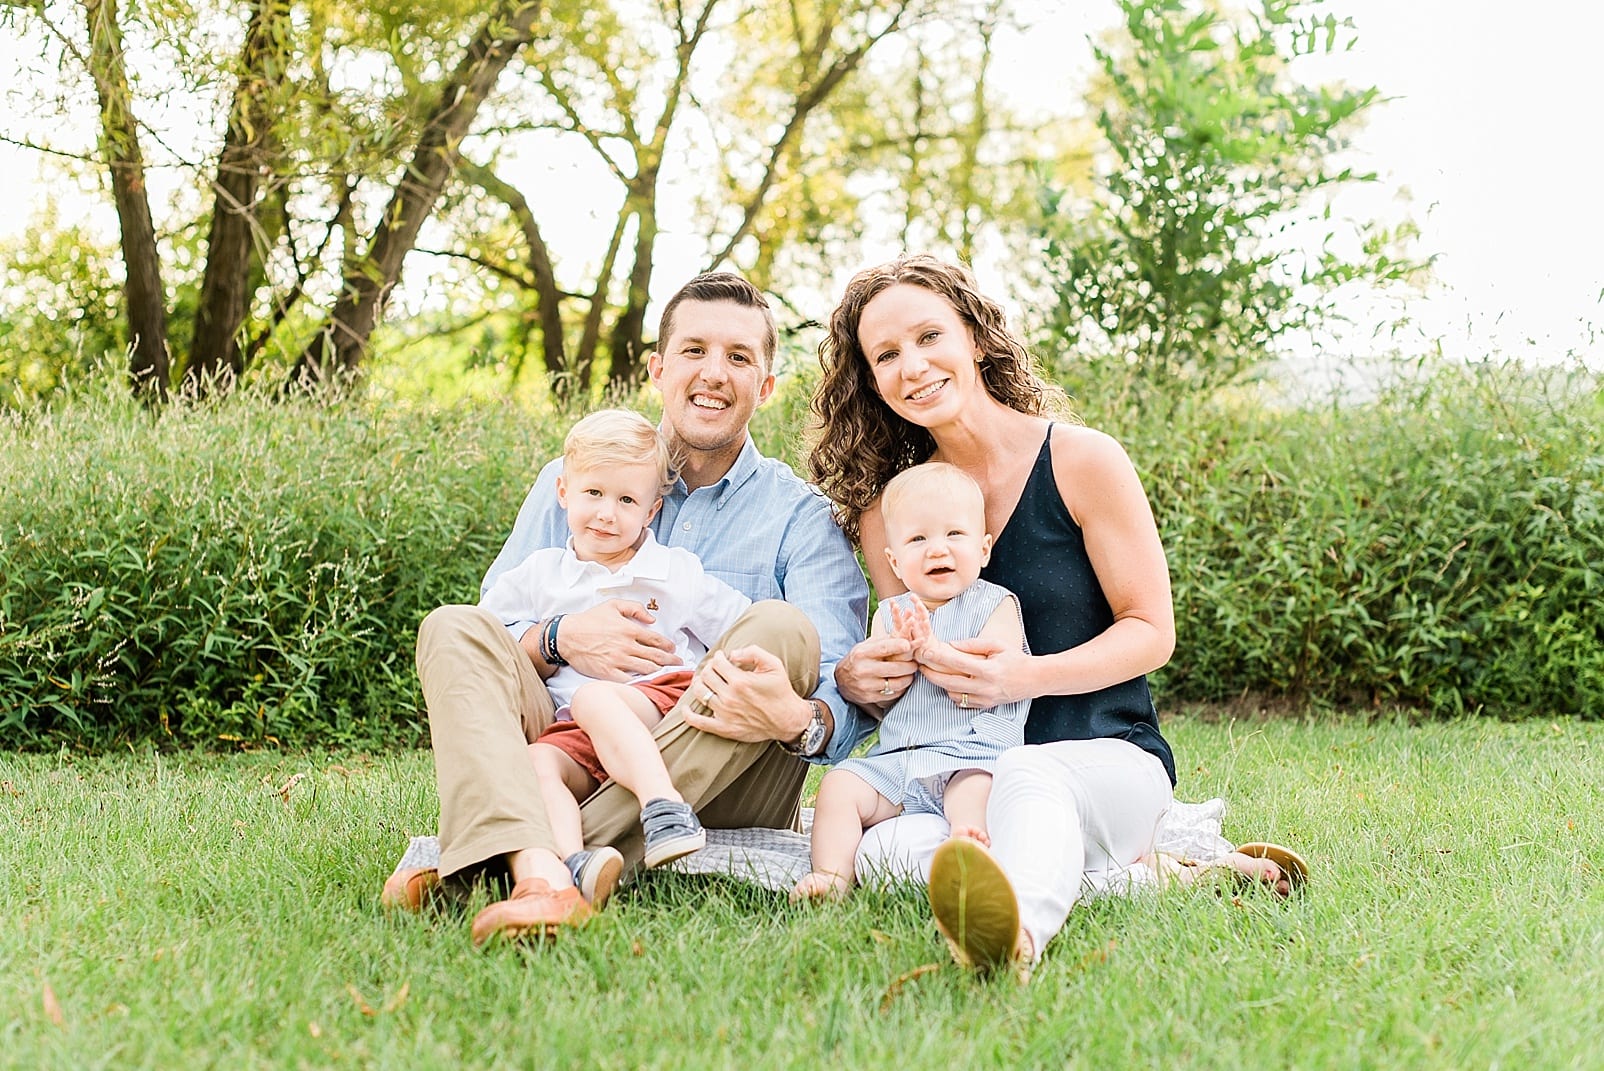 Raleigh family photographer near Raleigh family of four with two little boys sitting together in the grass photo